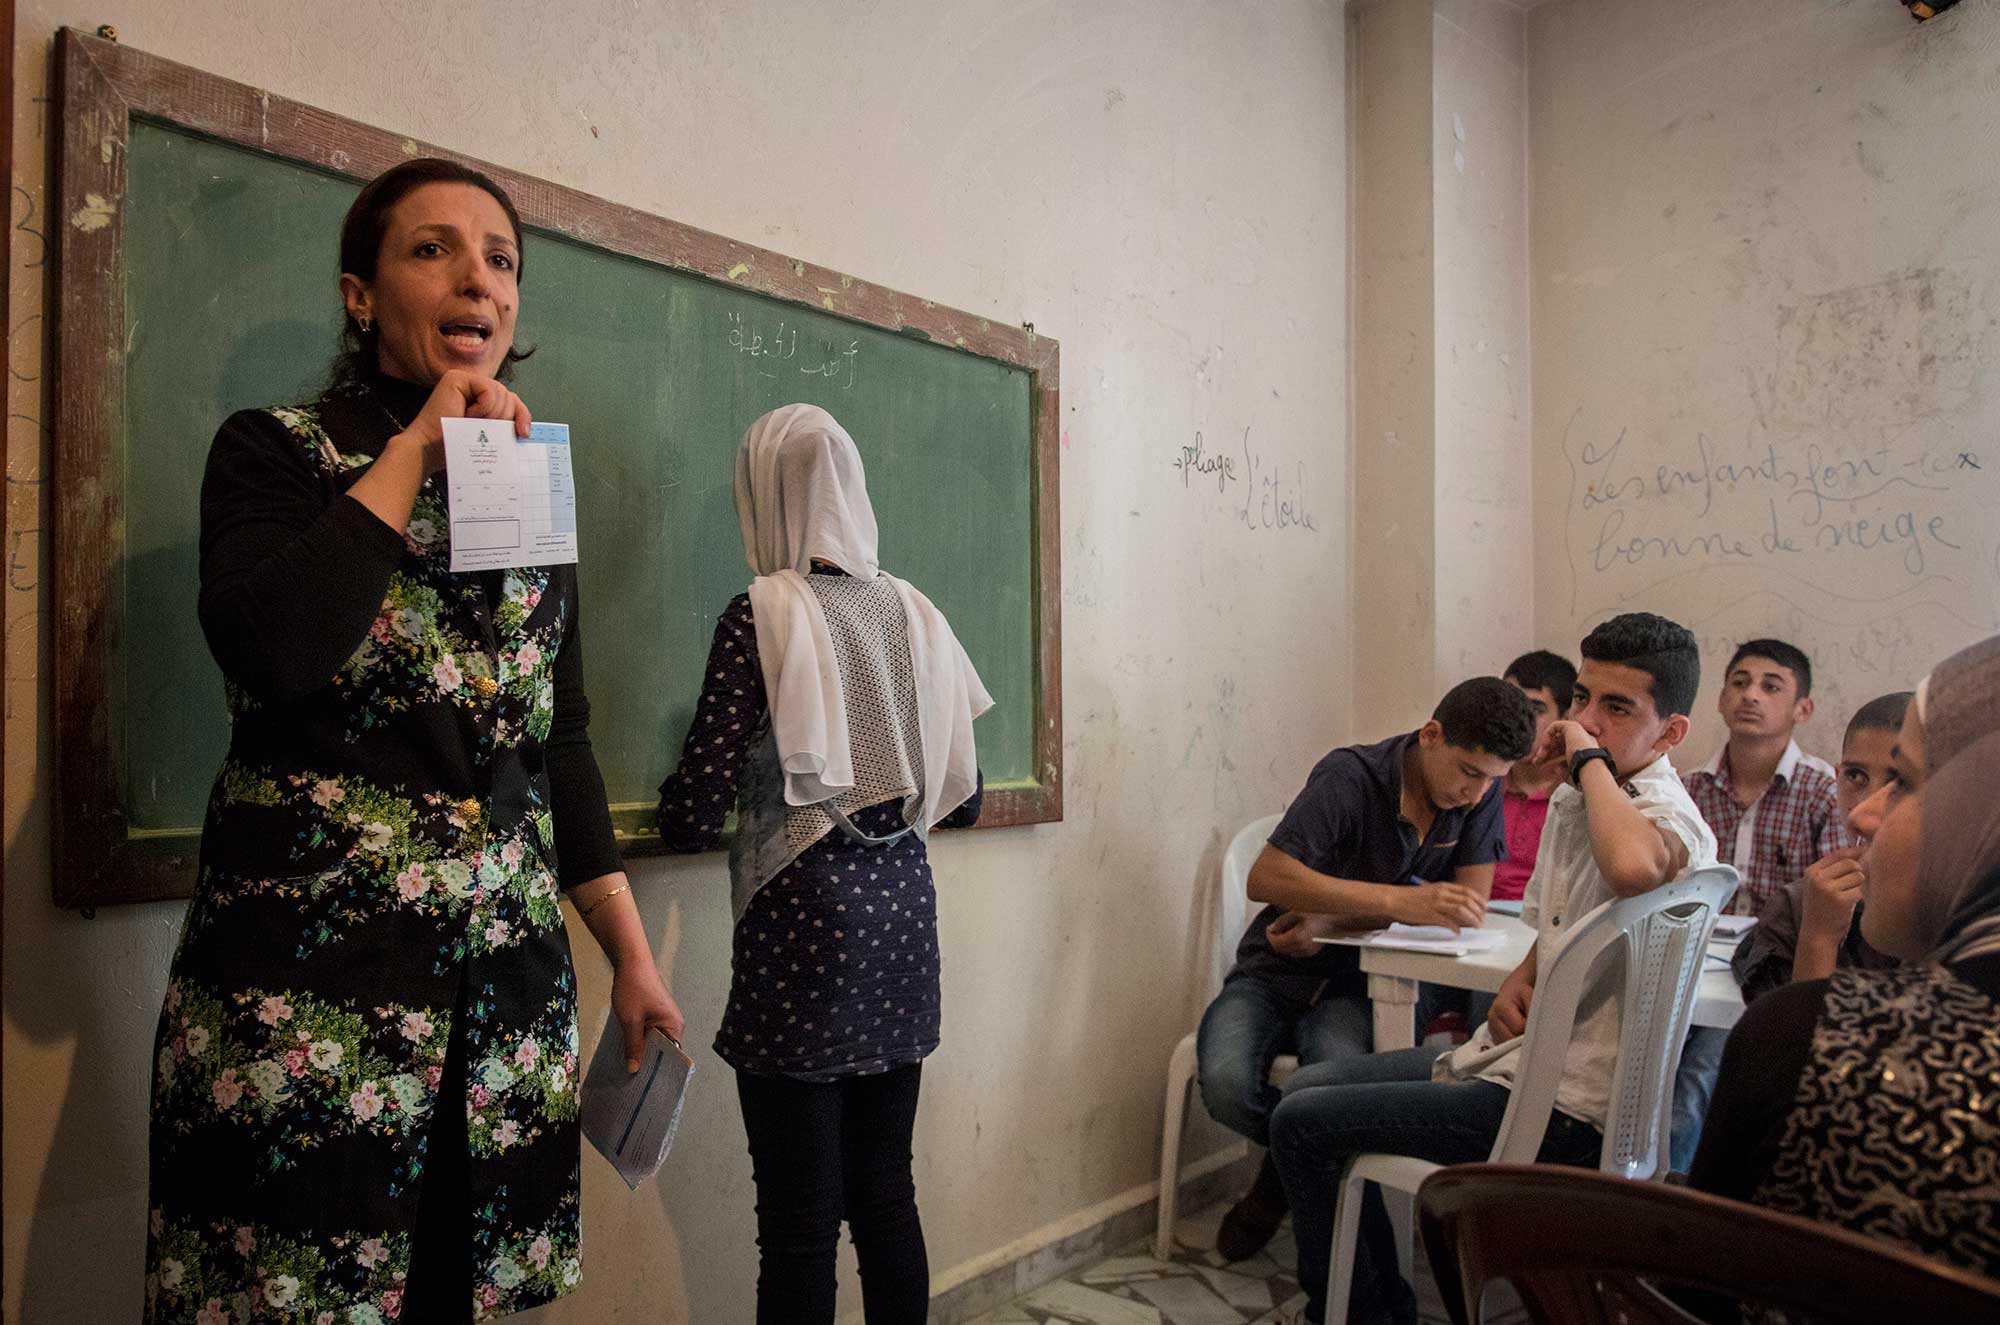 Over 20 students are enrolled in Anera's health class for refugee education in Lebanon.